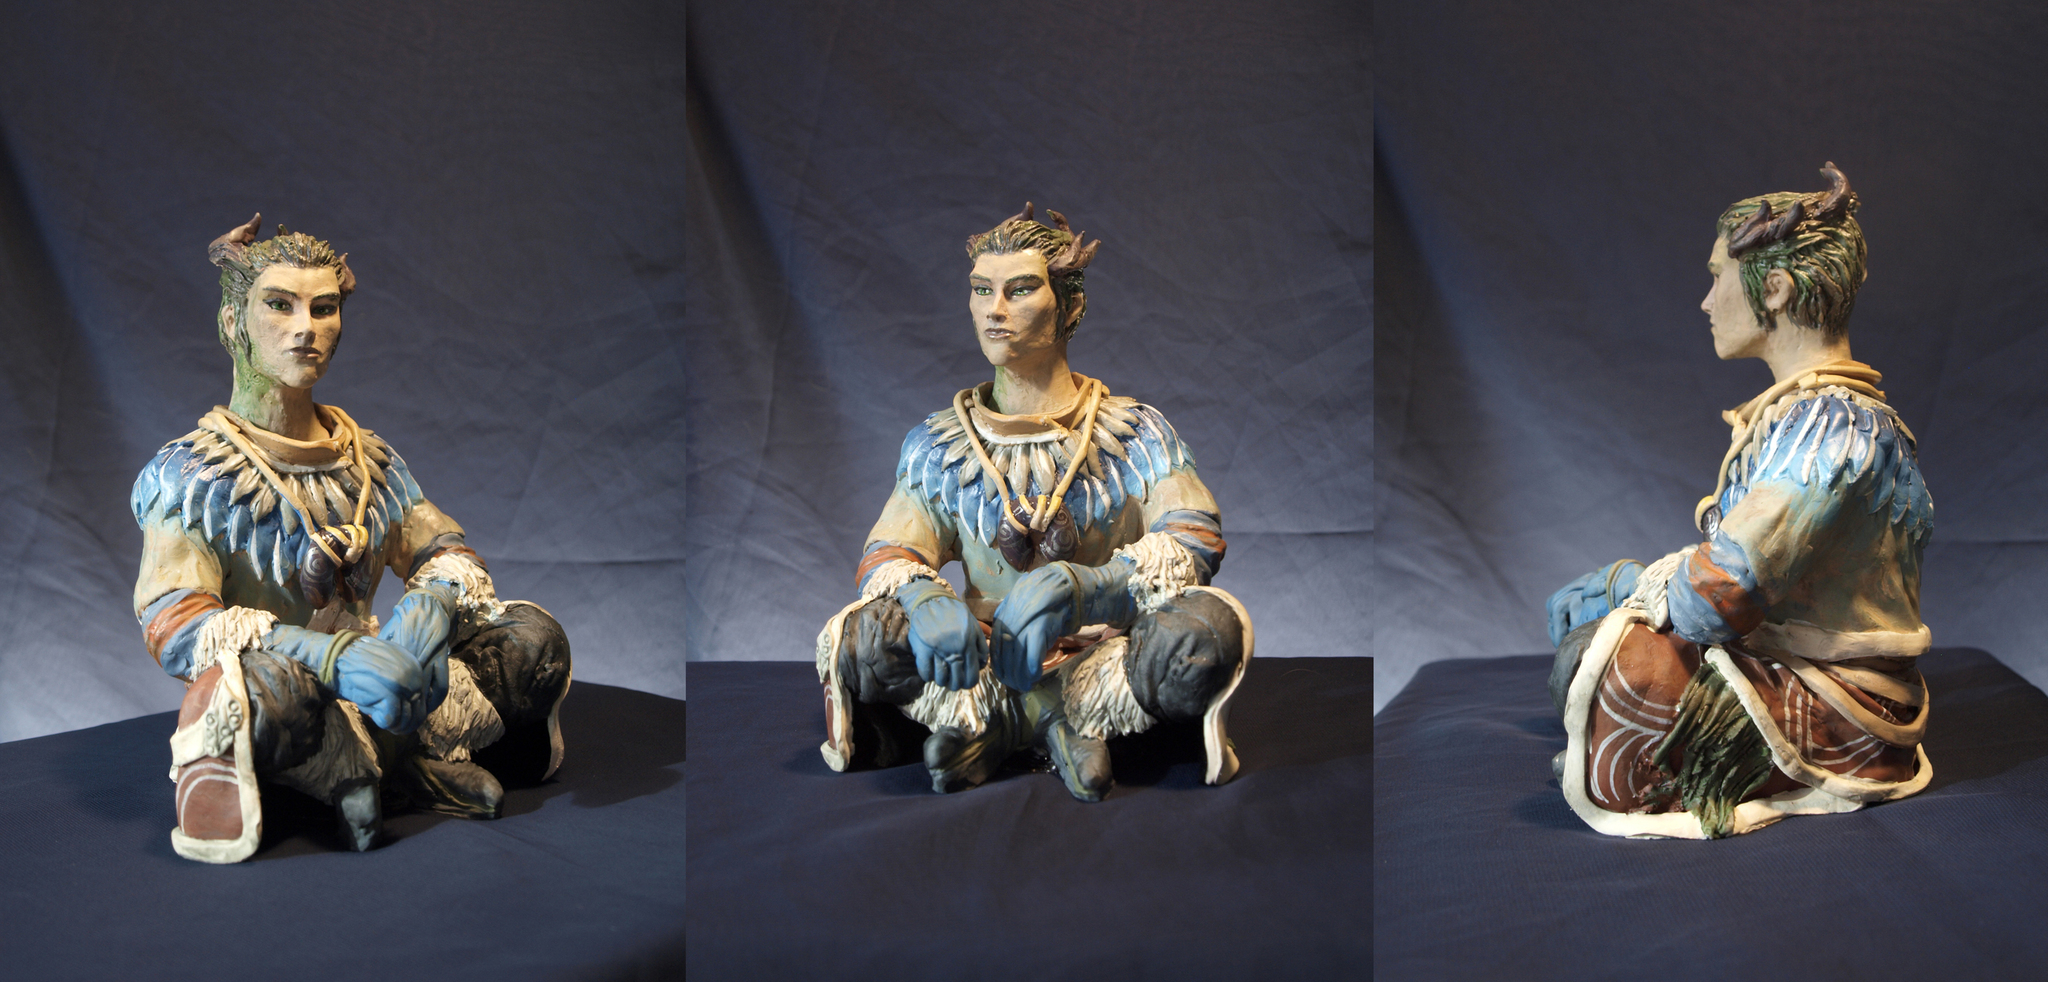 Figures based on the game Greedfall. Siora - My, Kai Yara, Sculpture, Needlework without process, Figurines, Greedfall, Video, Youtube, Longpost